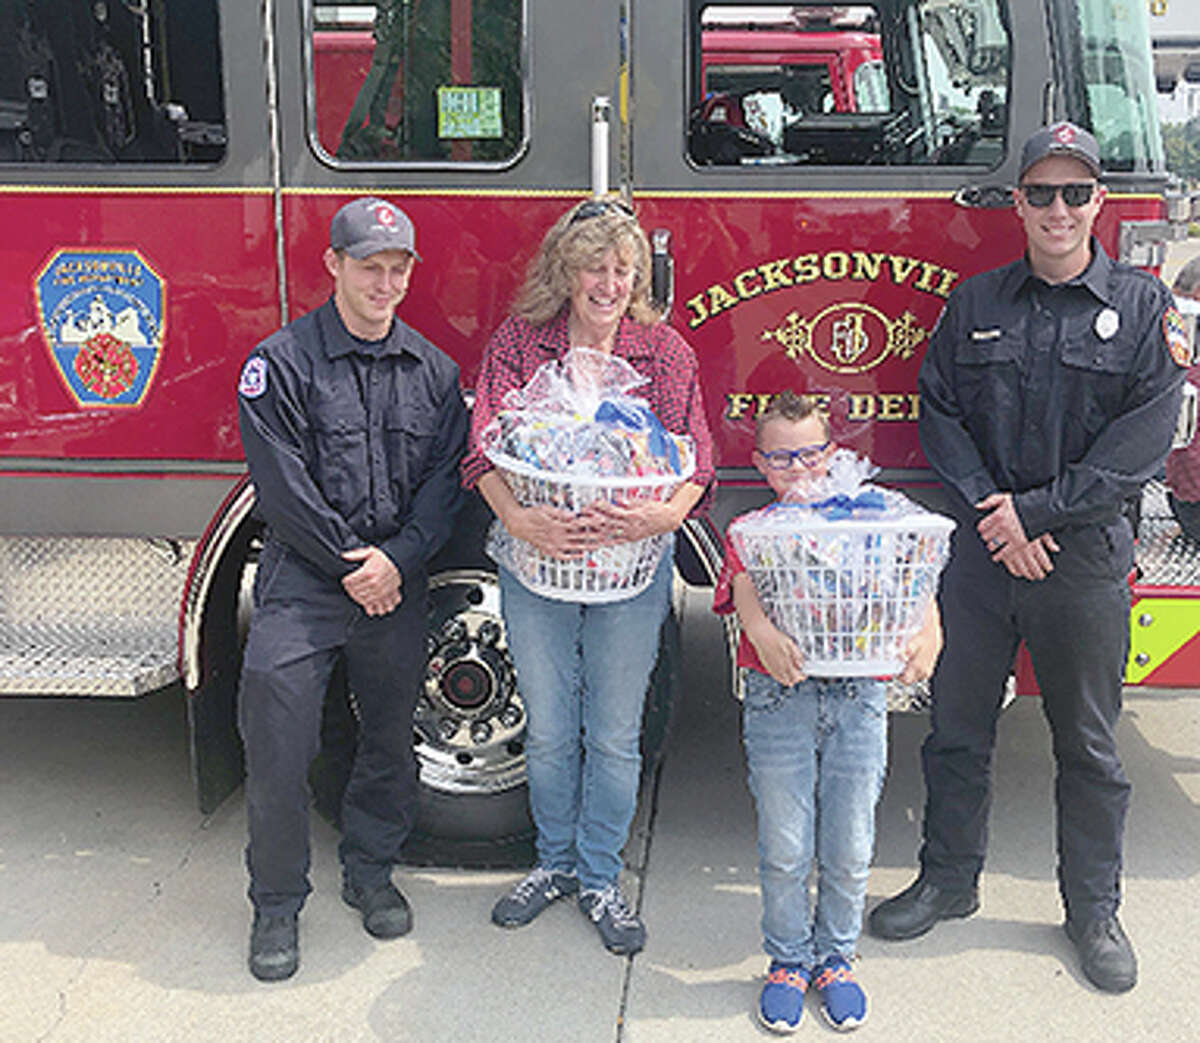 Jacksonville Fire Department members accept gift baskets presented by Buchheit retail department manager Sue Radkiewicz and her grandson, Jackson.